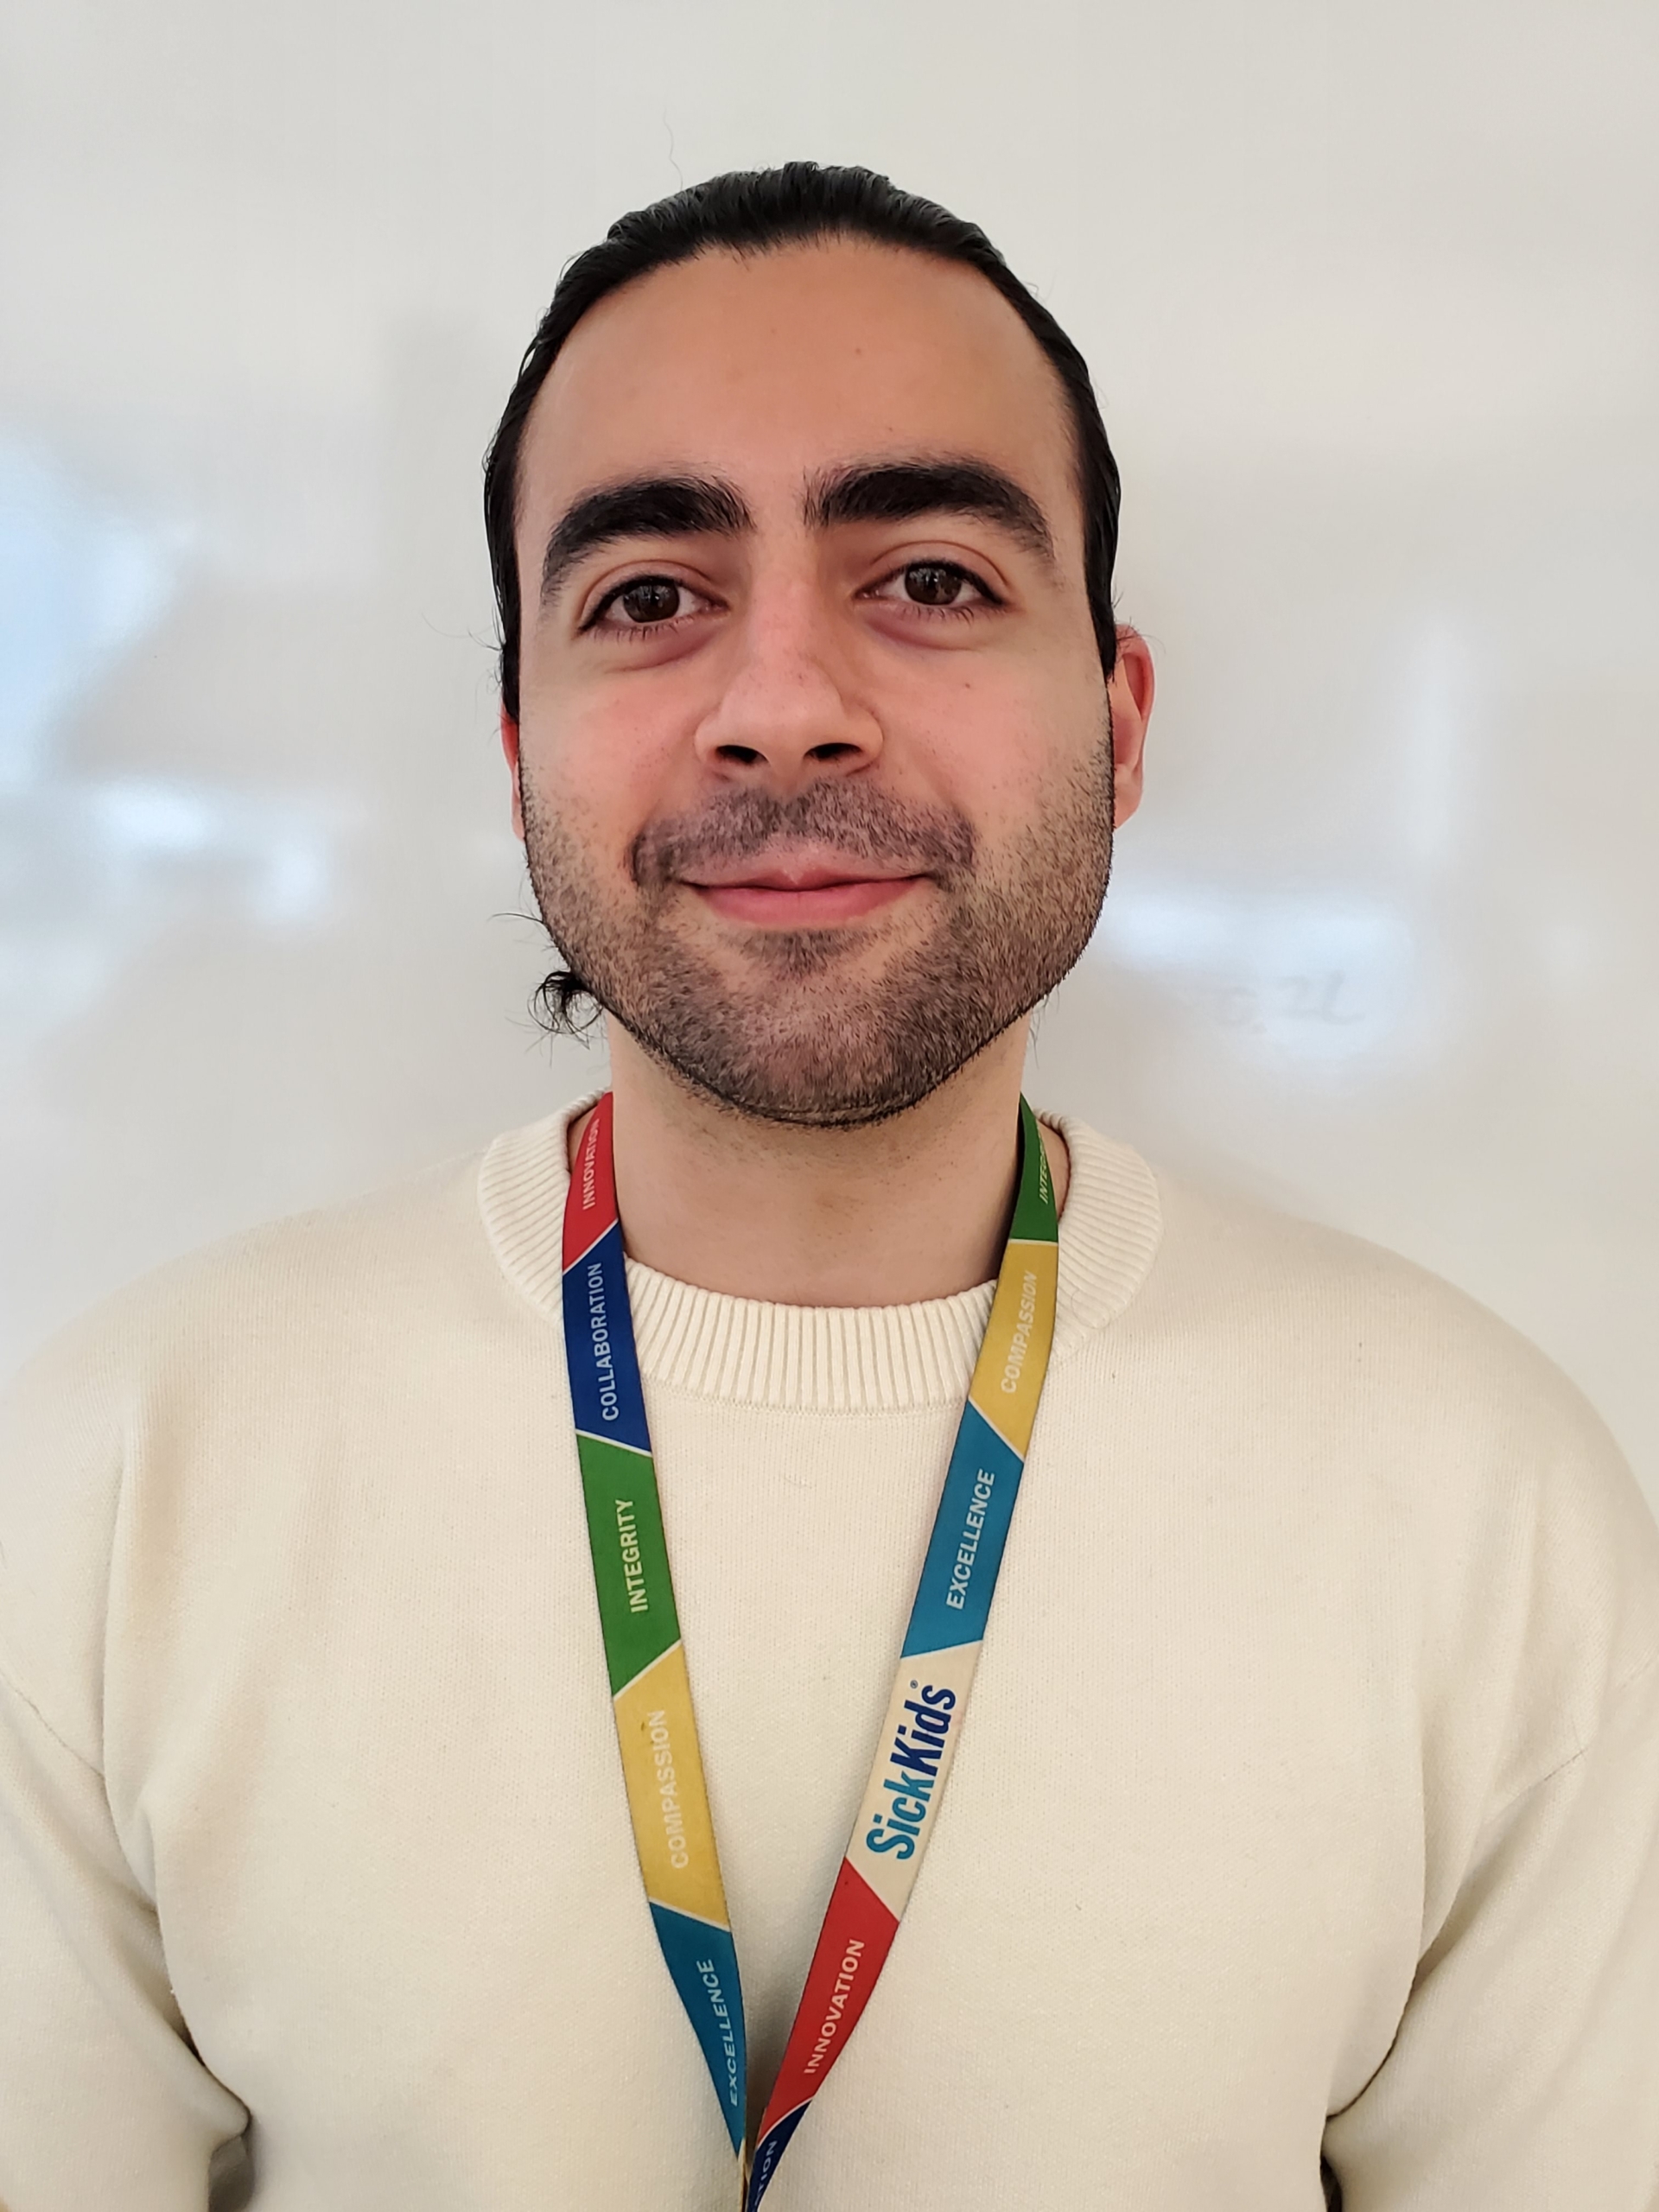 Smiling caucasian male with a 5'o clock shadow, wearing an official lanyard and white sweater.